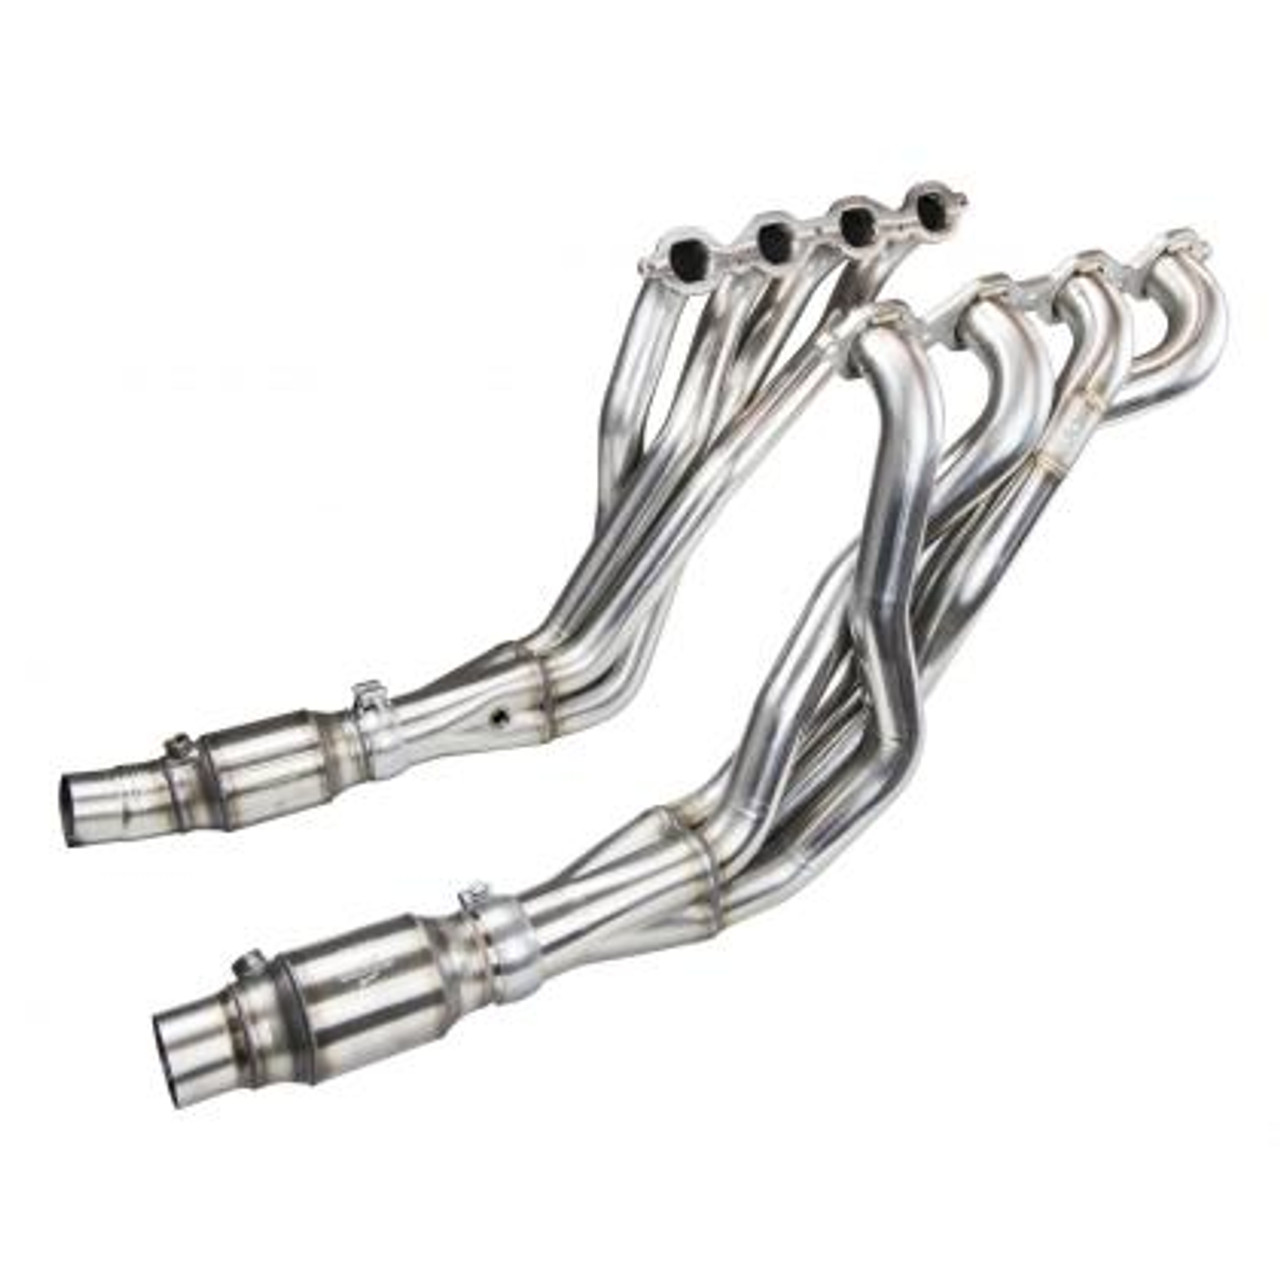 Kooks  2in x 3in SS Longtube Headers w/ High Flow Catted Pipes 16-23 Chevrolet Camaro (SS2260H620)